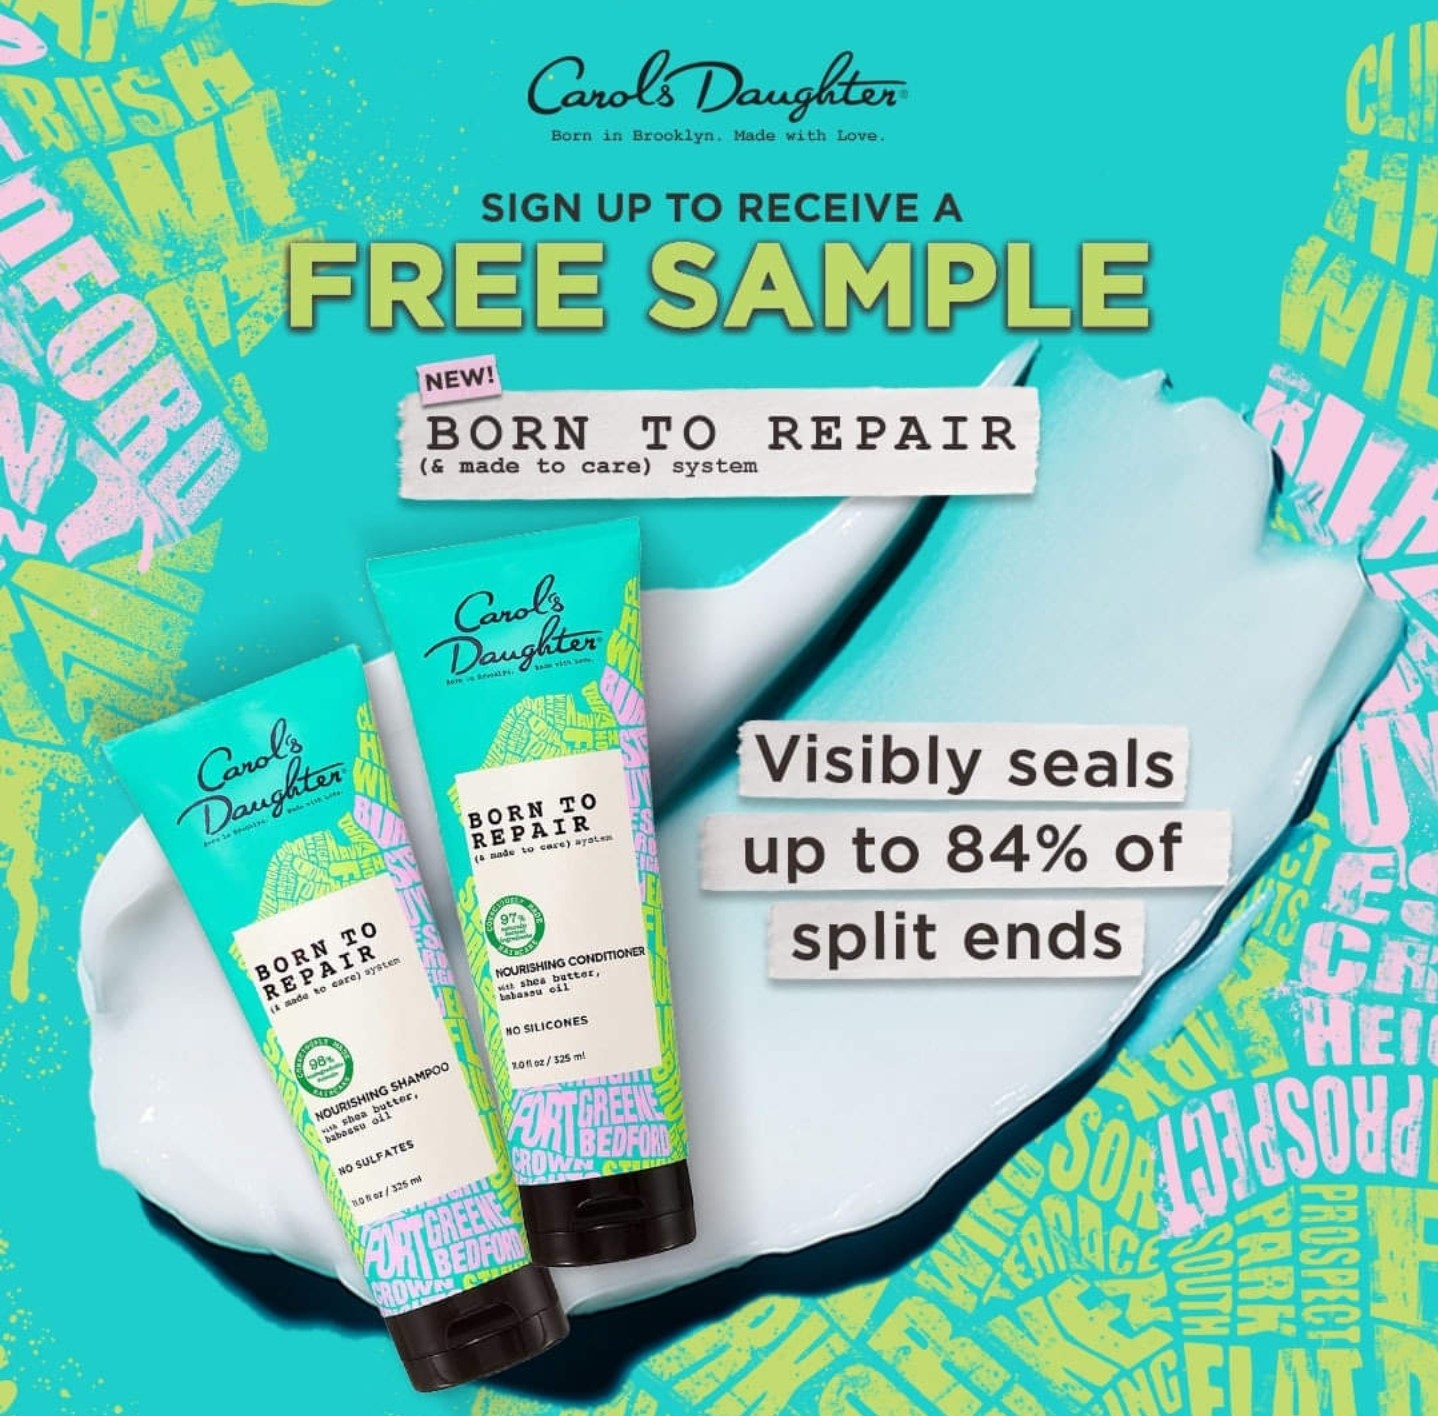 Free Sample of Carol’s Daughter Born to Repair Shampoo and Conditioner